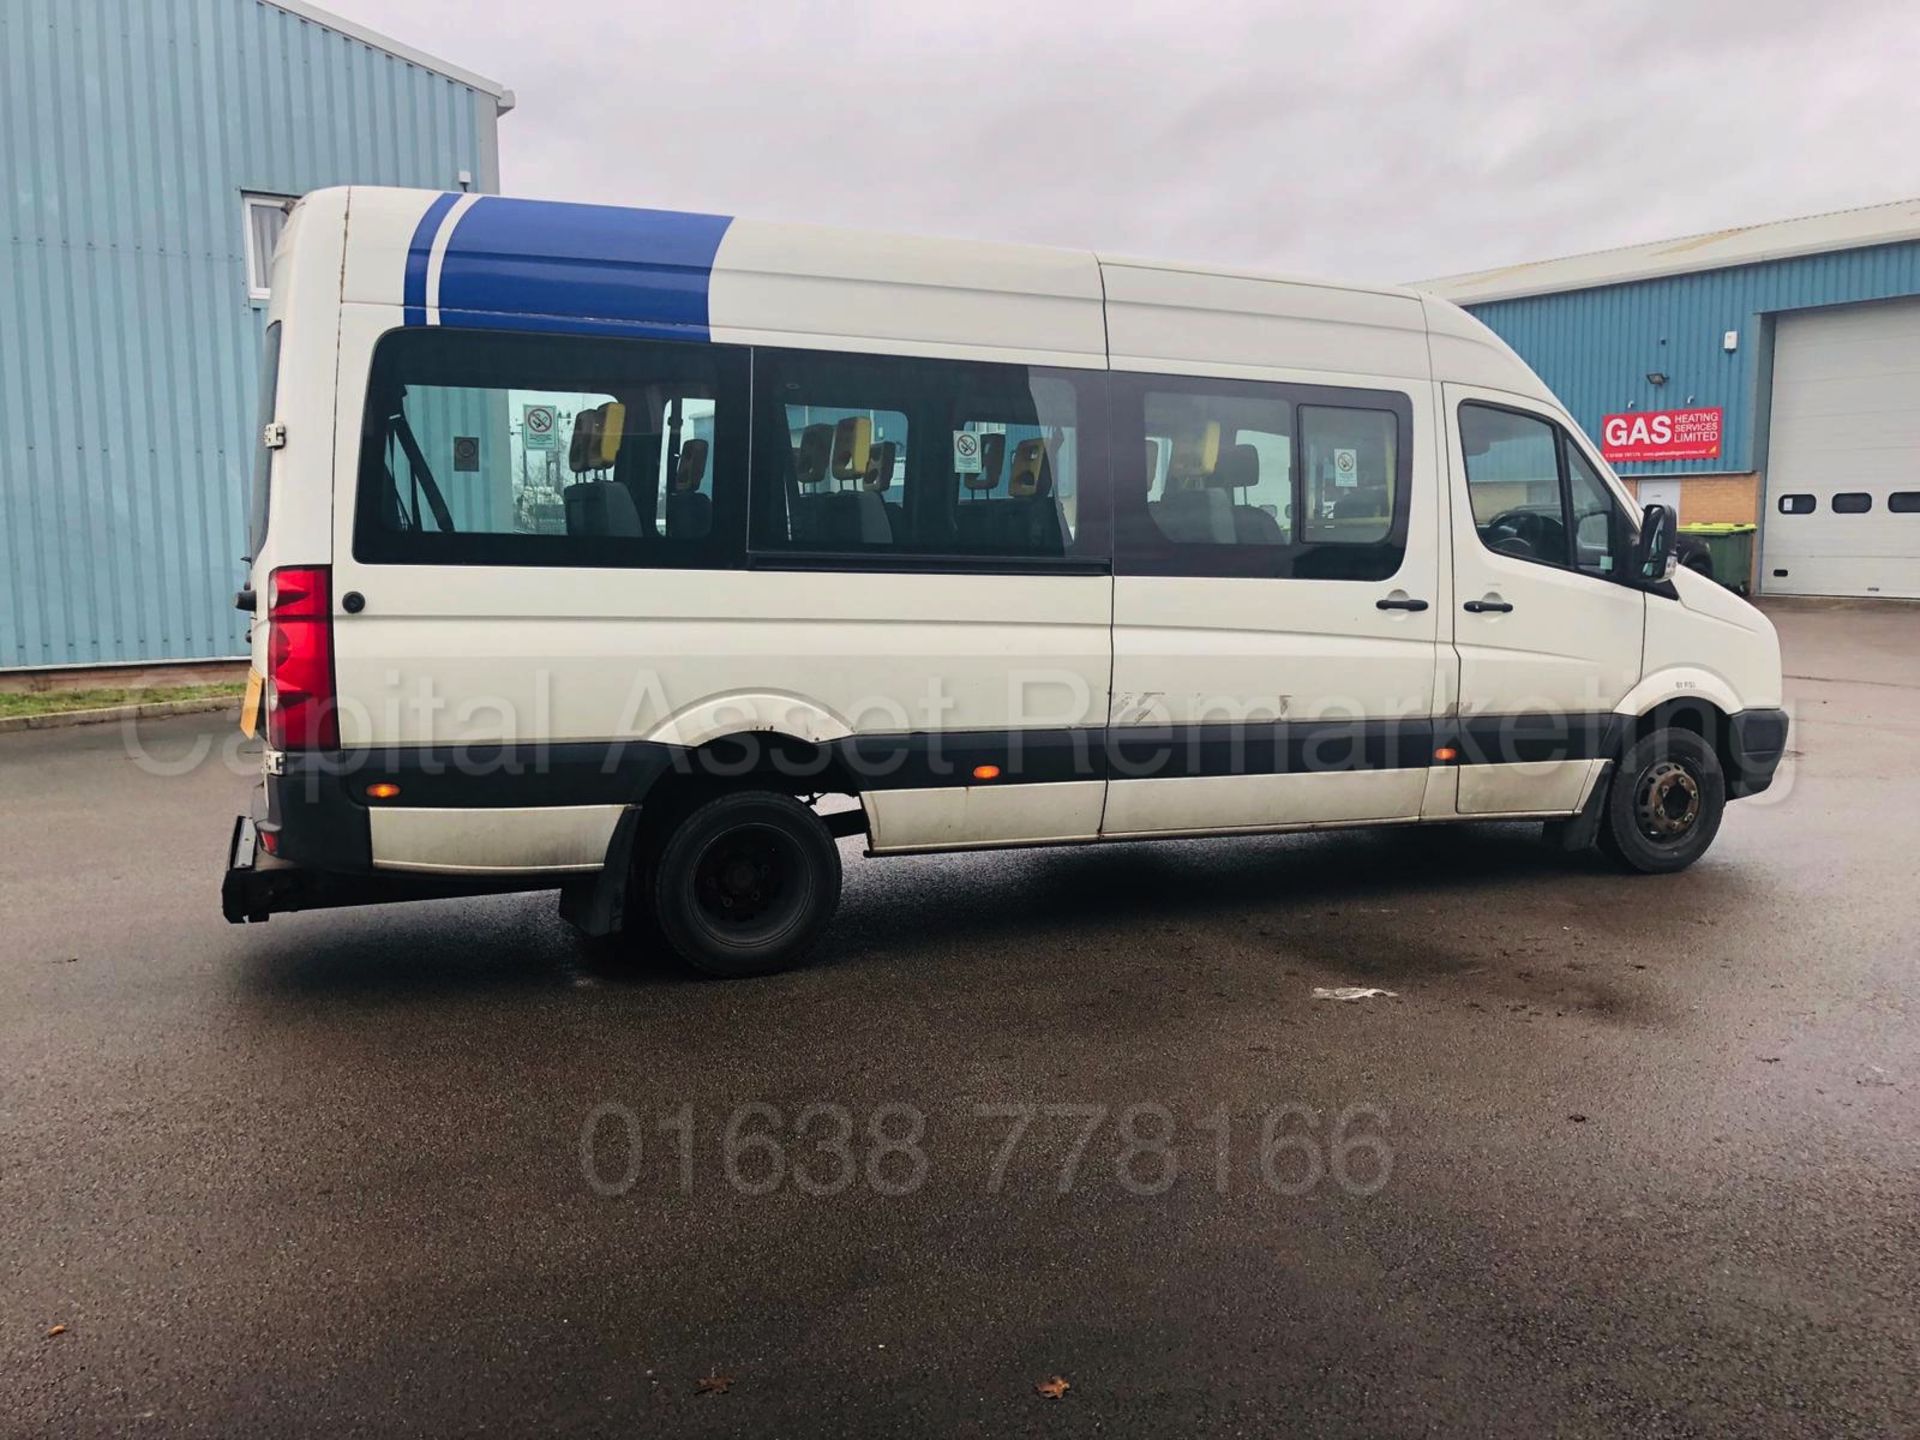 VOLKSWAGEN CRAFTER 2.5 TDI *LWB - 16 SEATER MINI-BUS / COACH* (2007) *ELECTRIC WHEEL CHAIR LIFT* - Image 9 of 30